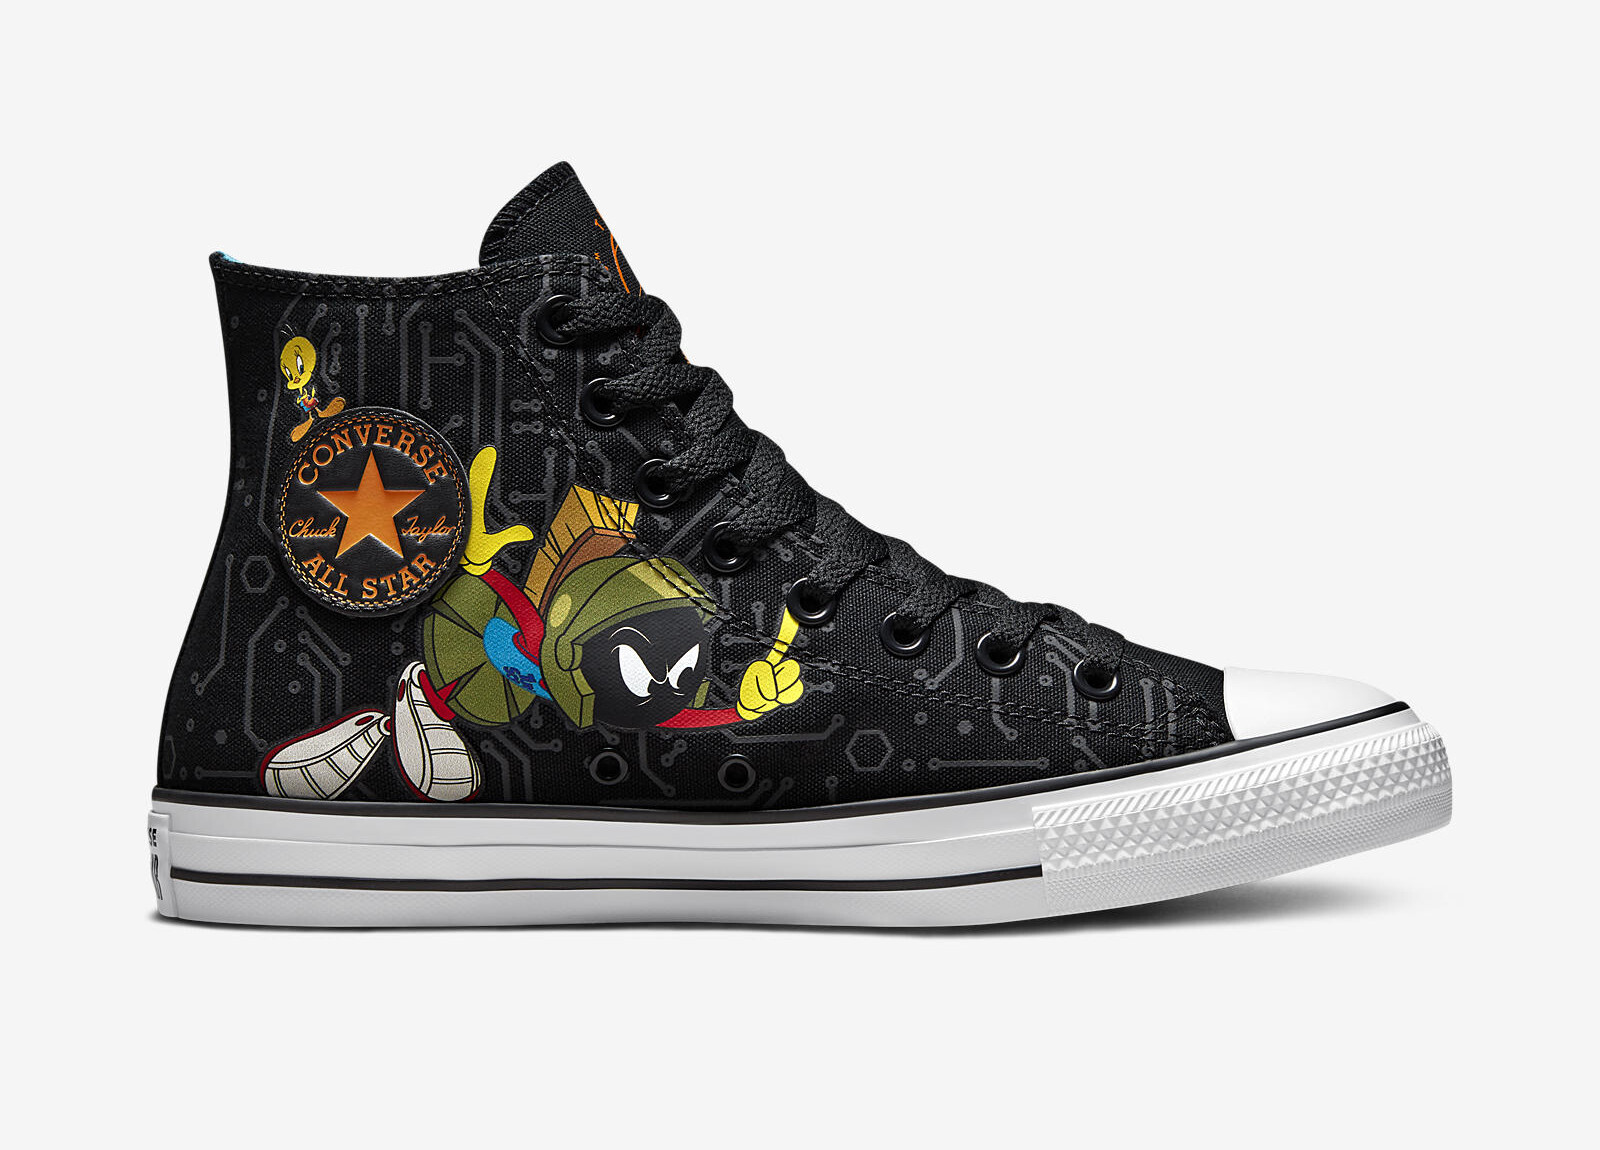 Converse x Space Jam
A New Legacy
Chuck Taylor All Star